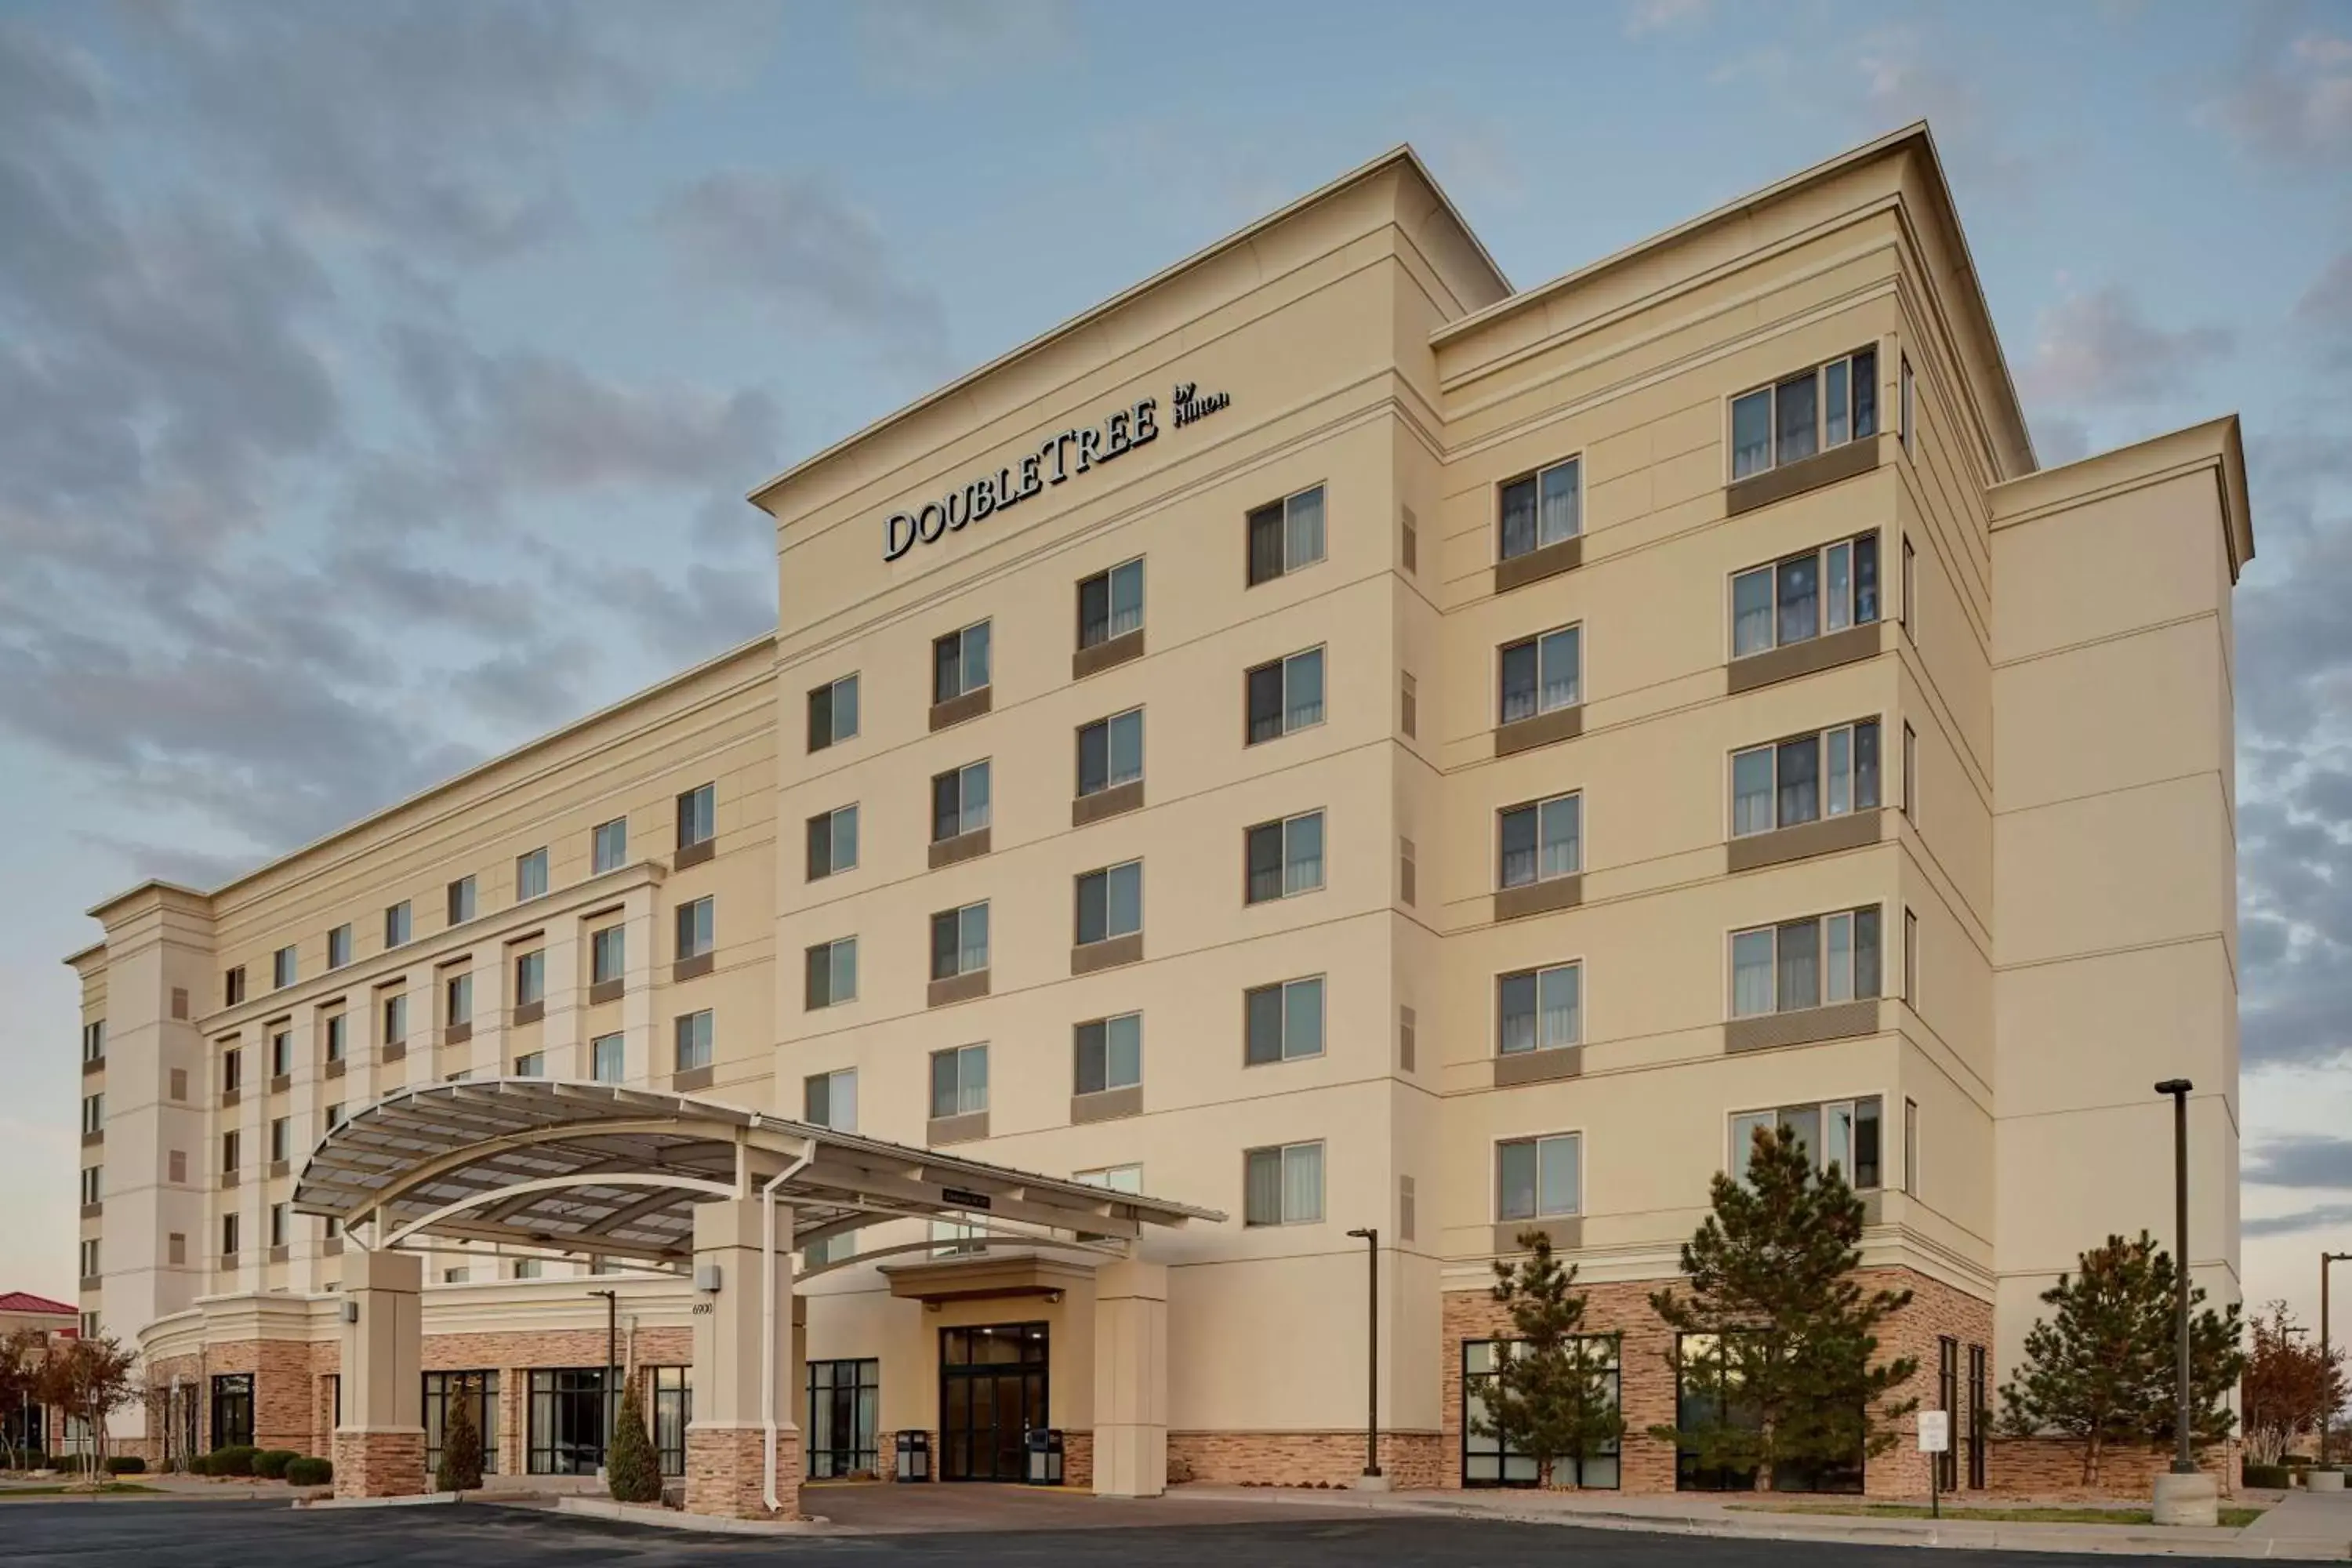 Property Building in DoubleTree by Hilton Denver International Airport, CO